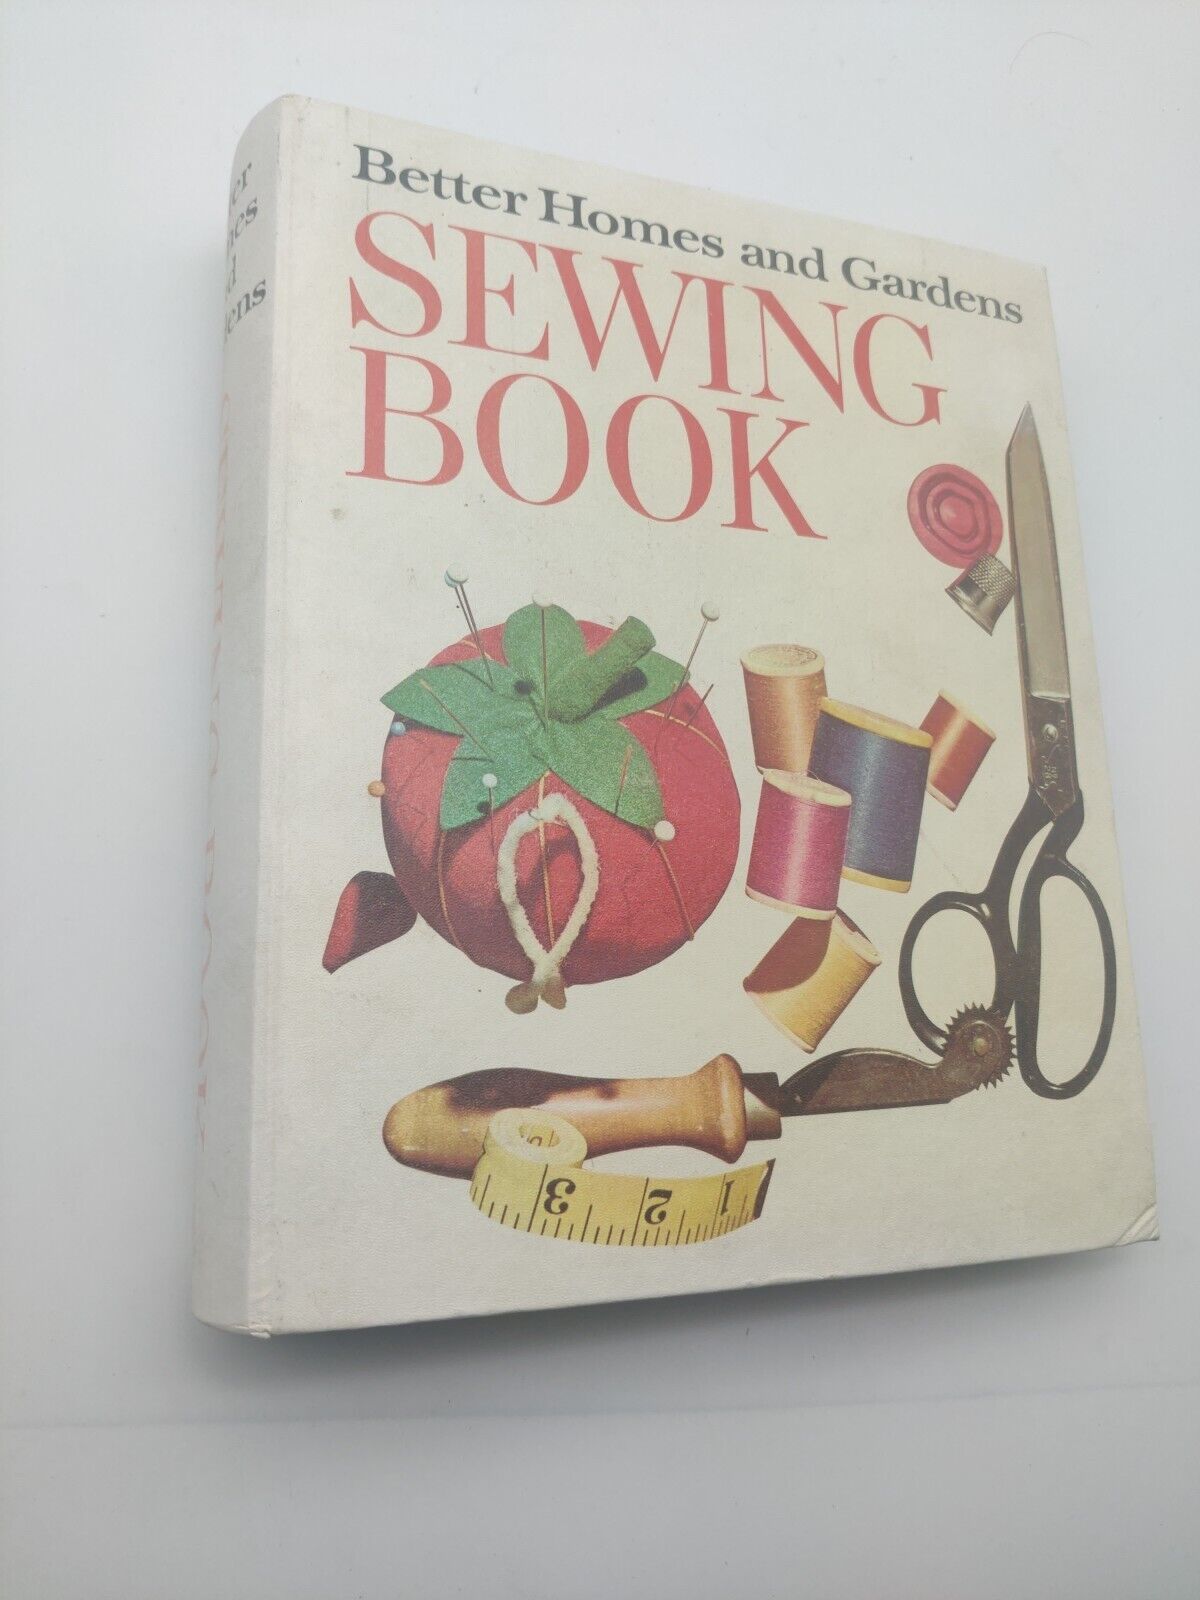 Better Homes and Gardens Sewing Book Indexed 5-Ring Binder 1970 Vintage 